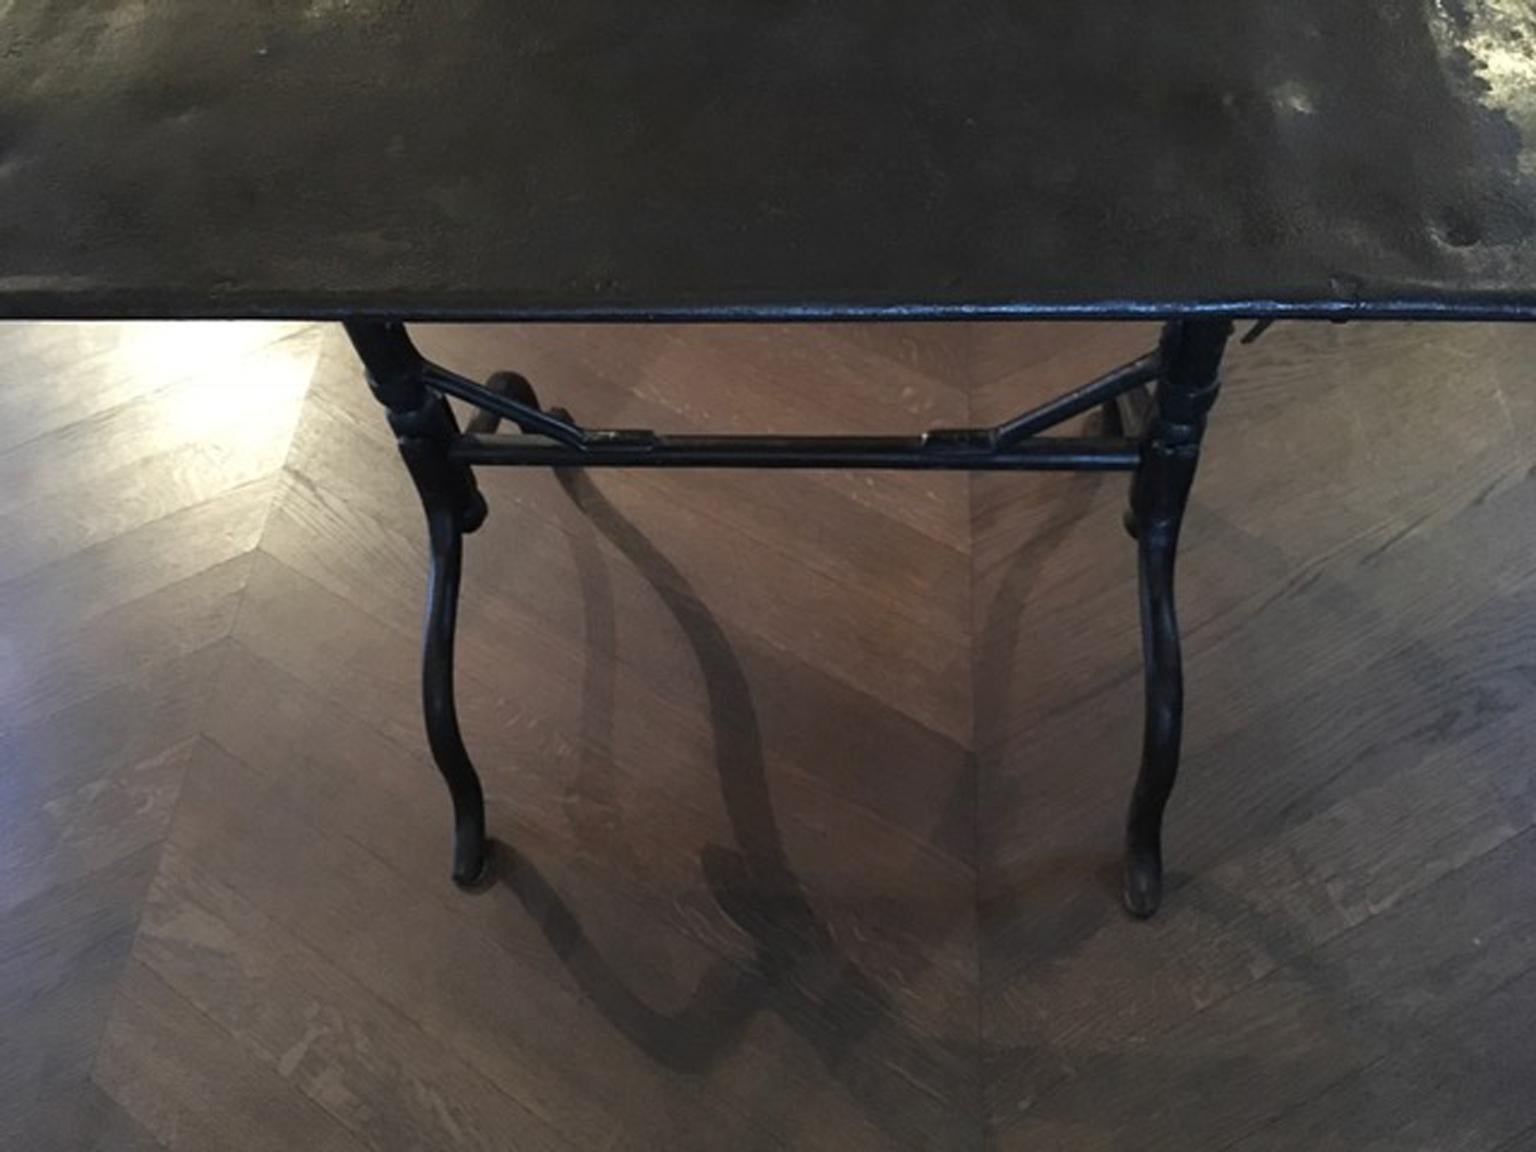 1930 France Wrought Iron Bistrot Table with Folding Top Outdoor Indoor Use 2